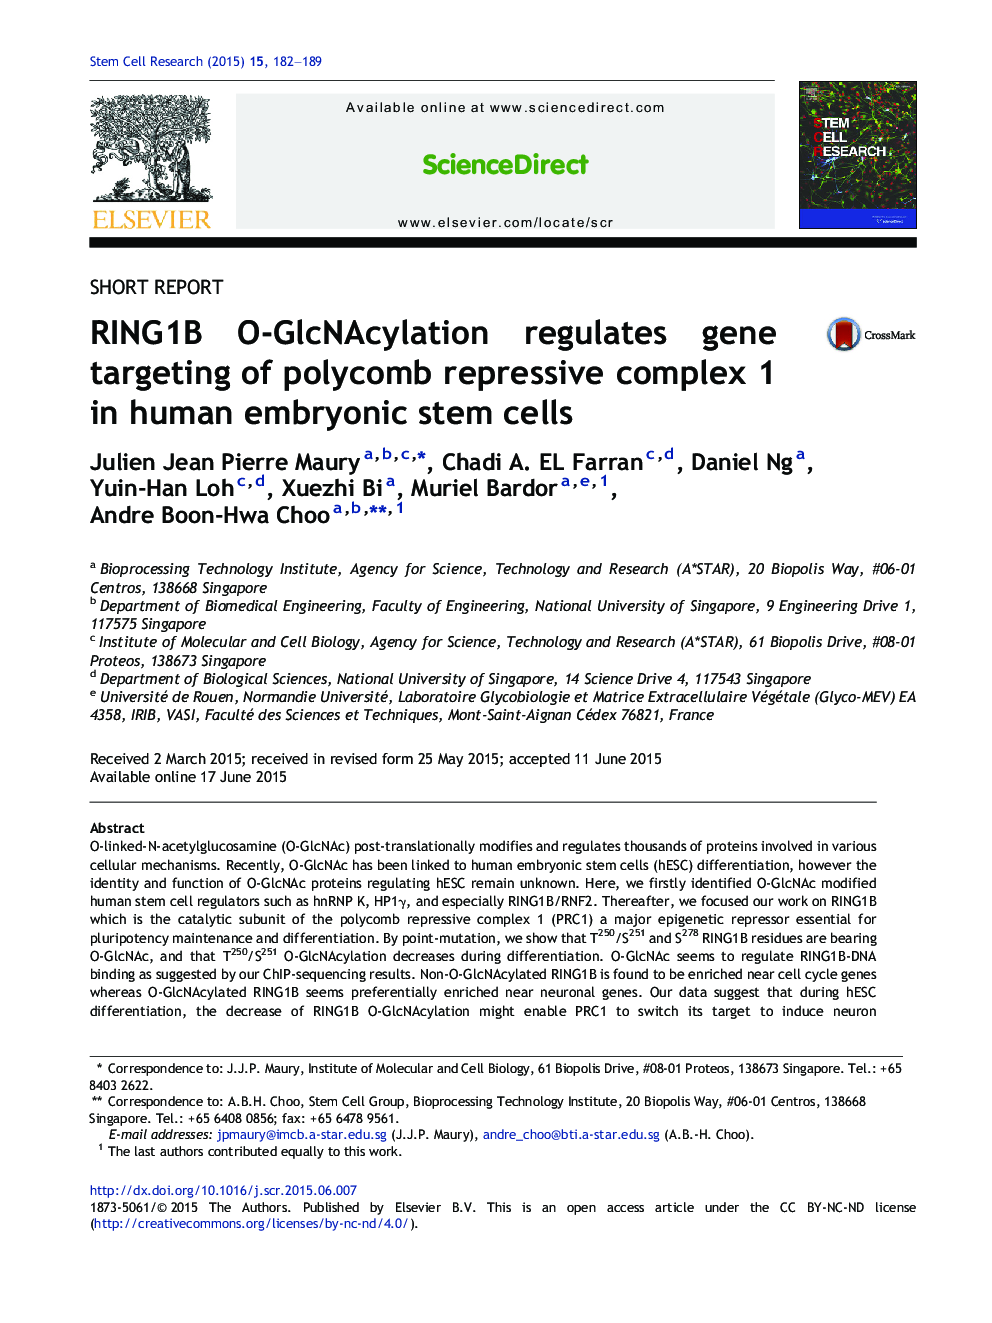 RING1B O-GlcNAcylation regulates gene targeting of polycomb repressive complex 1 in human embryonic stem cells